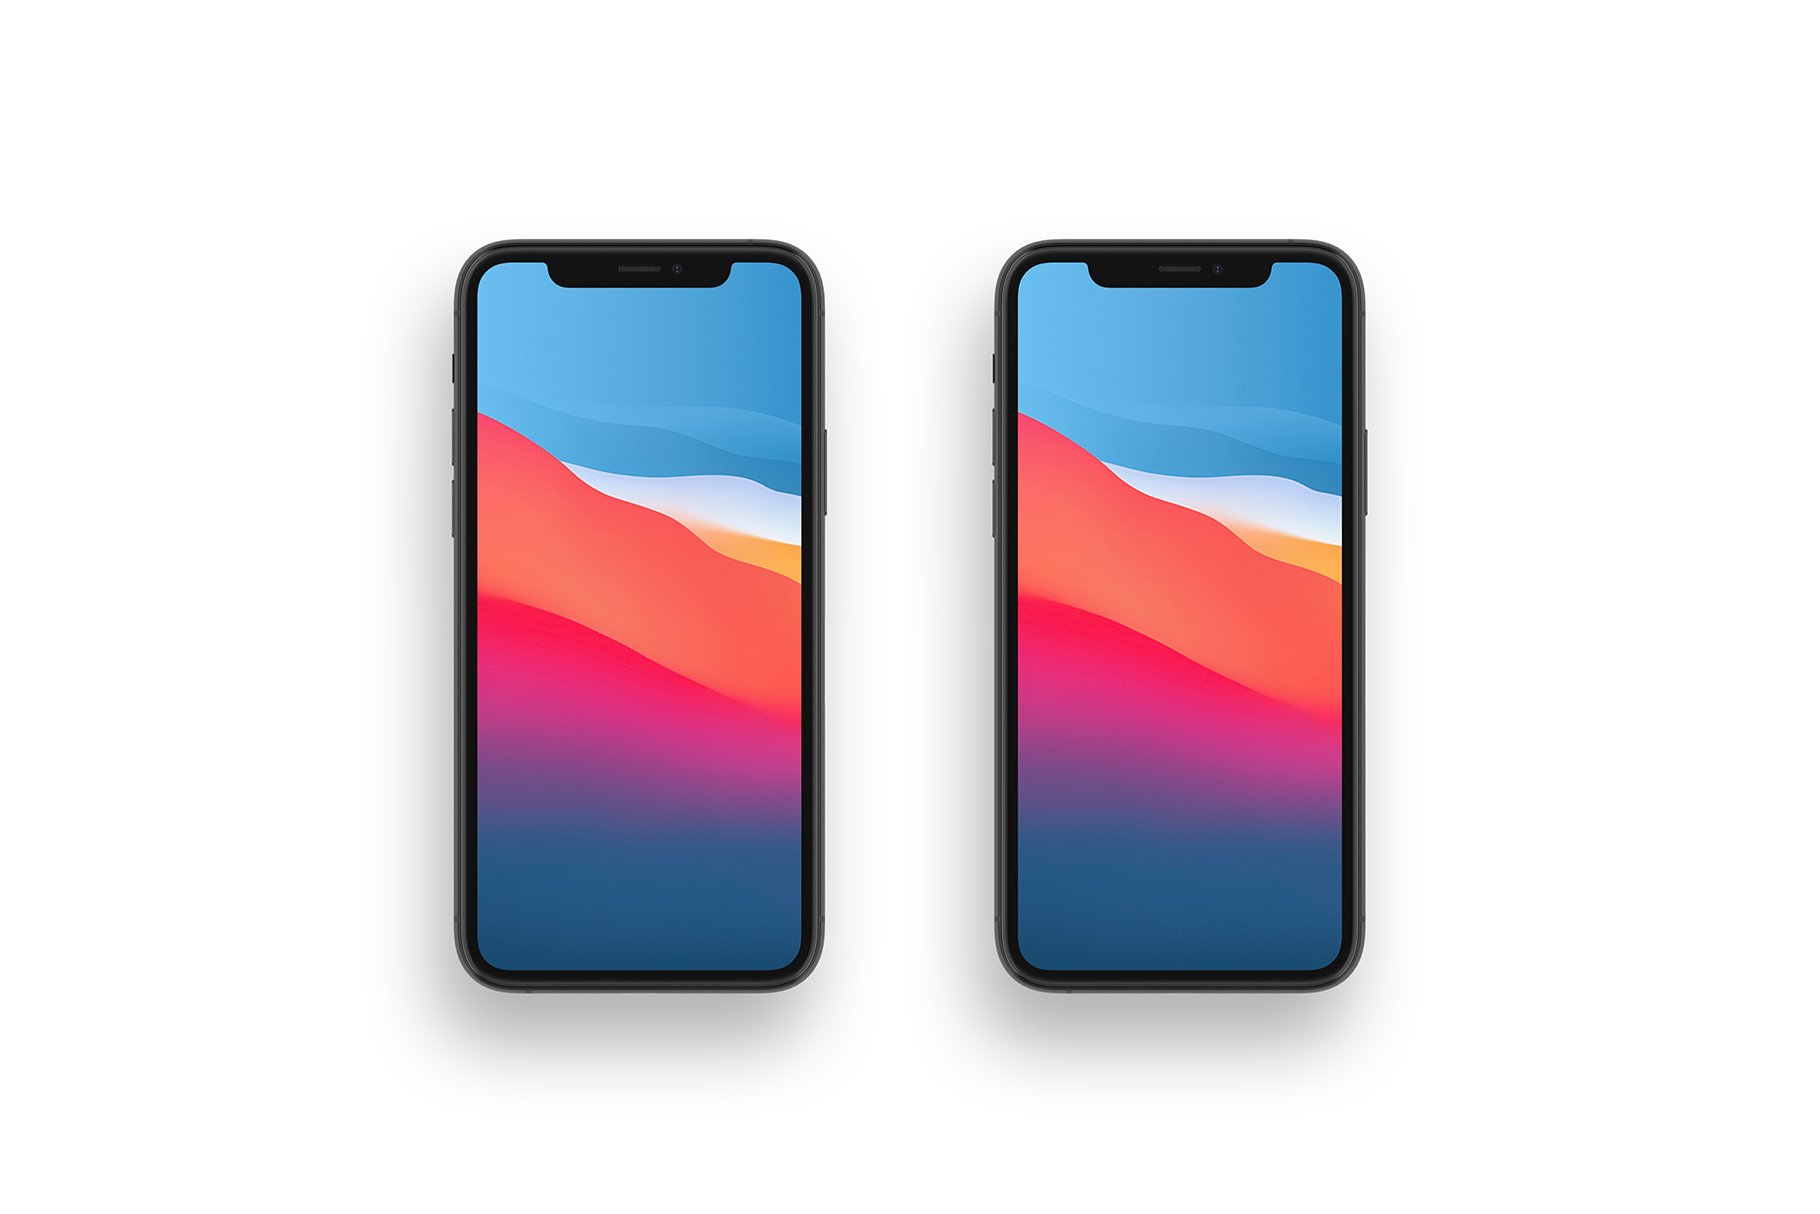 iphone 11 pro mockup pack by anthony boyd graphics 28s229 776